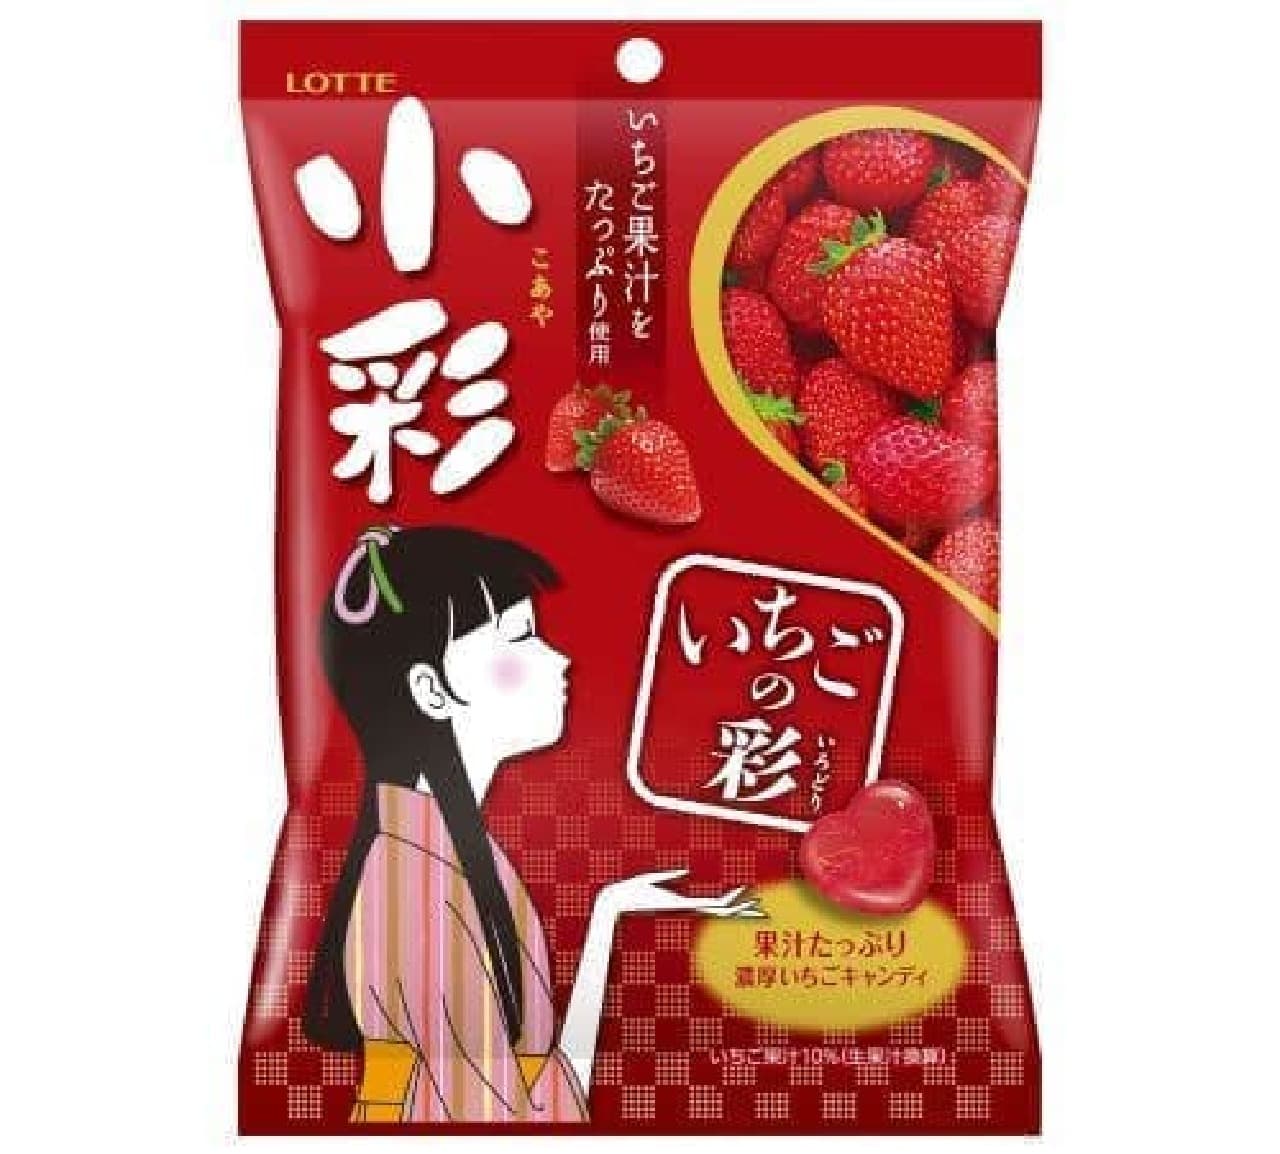 "Kosai [Strawberry Aya]" is a heart-shaped candy with a rich taste that uses plenty of strawberry juice.